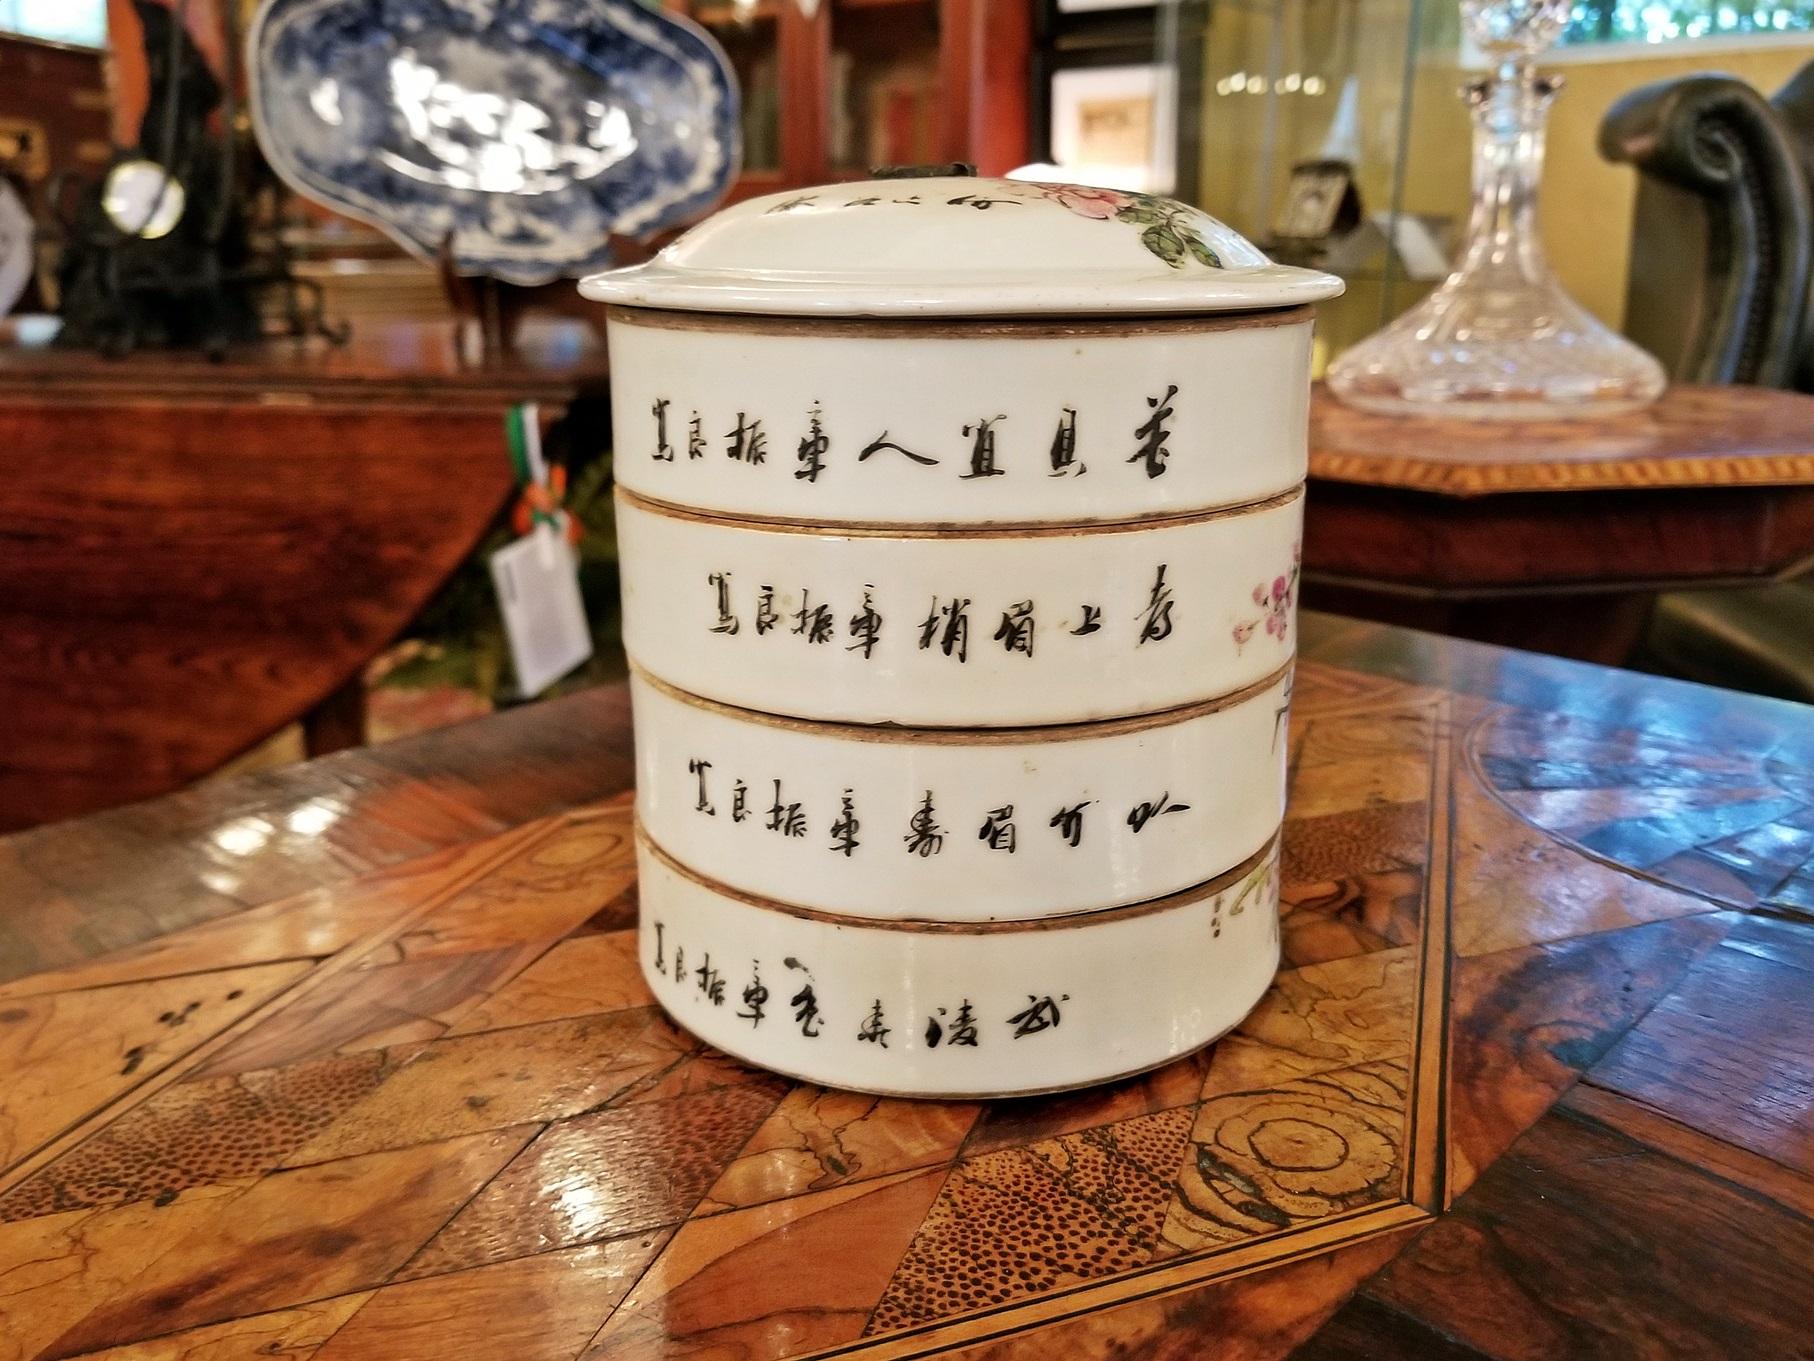 Presenting a gorgeous Chinese piece from circa 1860 … the Reign of Emperor Tongzhi.

This consists of 4 stackable bowls each with hand-painted bird and floral scenes and a Chinese poem. The bottom bowl is marked for the Tongzhi Emperor and the top